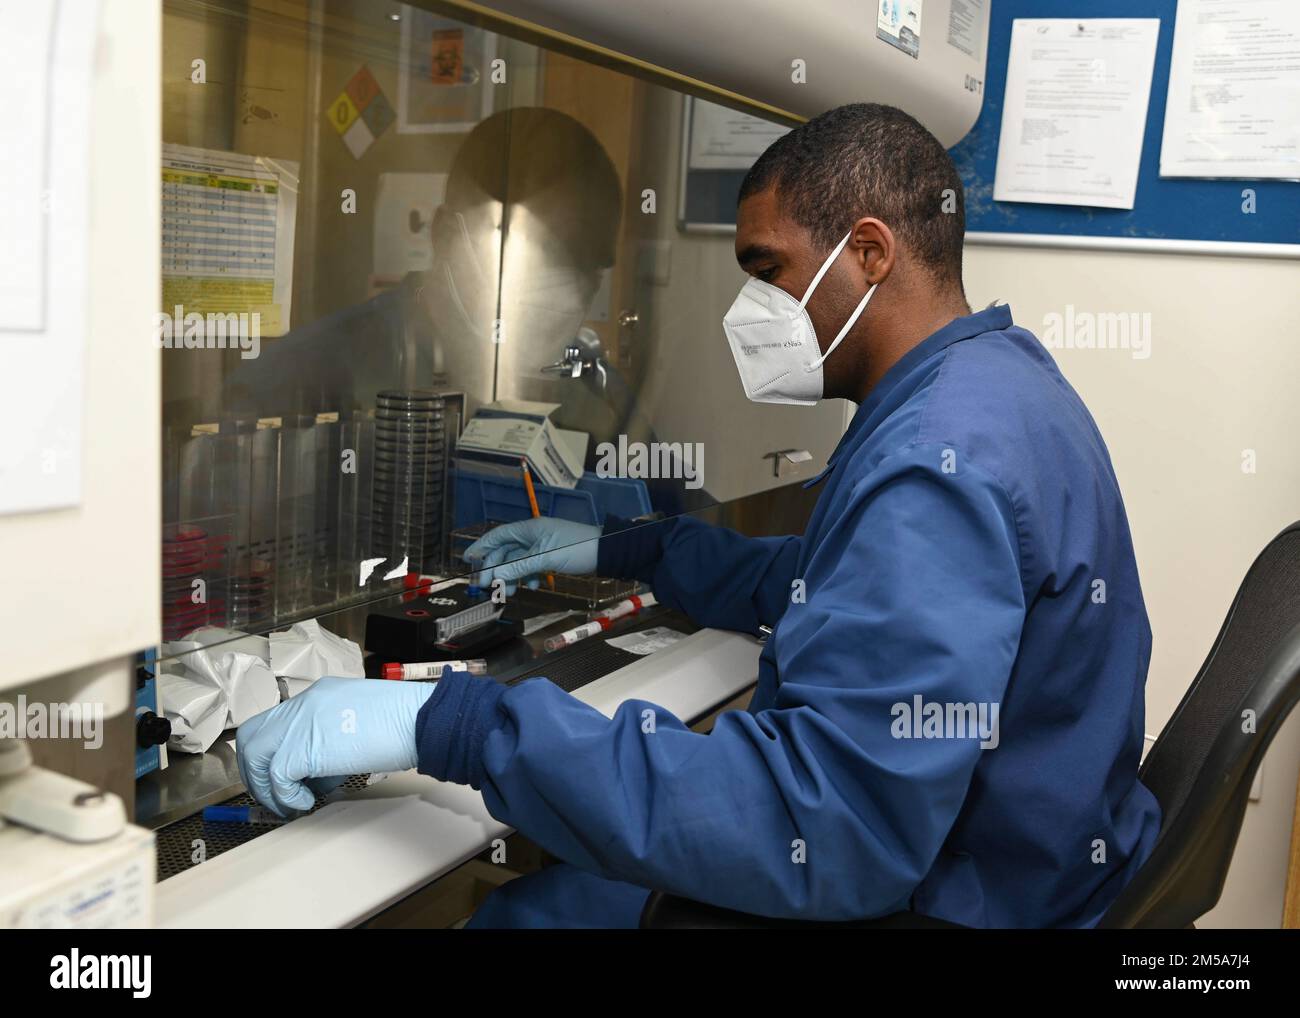 220215-N-UJ449-1021 NAVAL AIR STATION SIGONELLA, Italy (Feb. 15, 2022)— Hospitalman Devonta Johnson, from Lafayette, La., assigned to U.S. Navy Medicine and Readiness Training Command Sigonella, prepares COVID-19 swabs for testing on Naval Air Station Sigonella, Feb. 15, 2022. NAS Sigonella’s strategic location enables U.S., allied, and partner nation forces to deploy and respond as required, ensuring security and stability in Europe, Africa and Central Command. Stock Photo